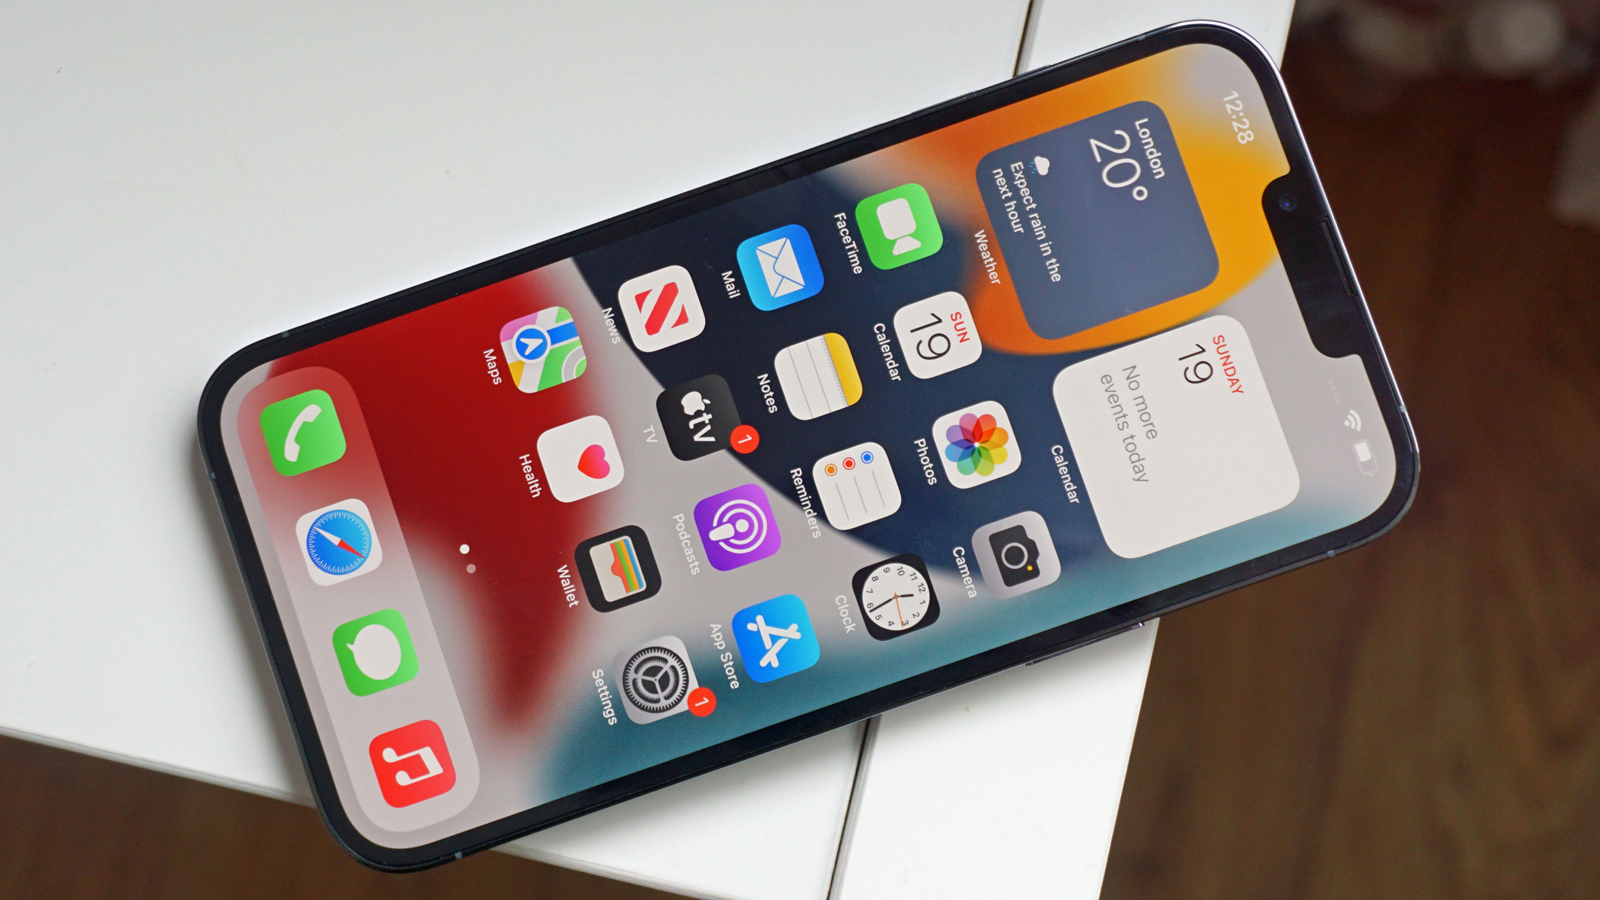 iPhone 13 Pro Max lies on a table face up and displays the home screen